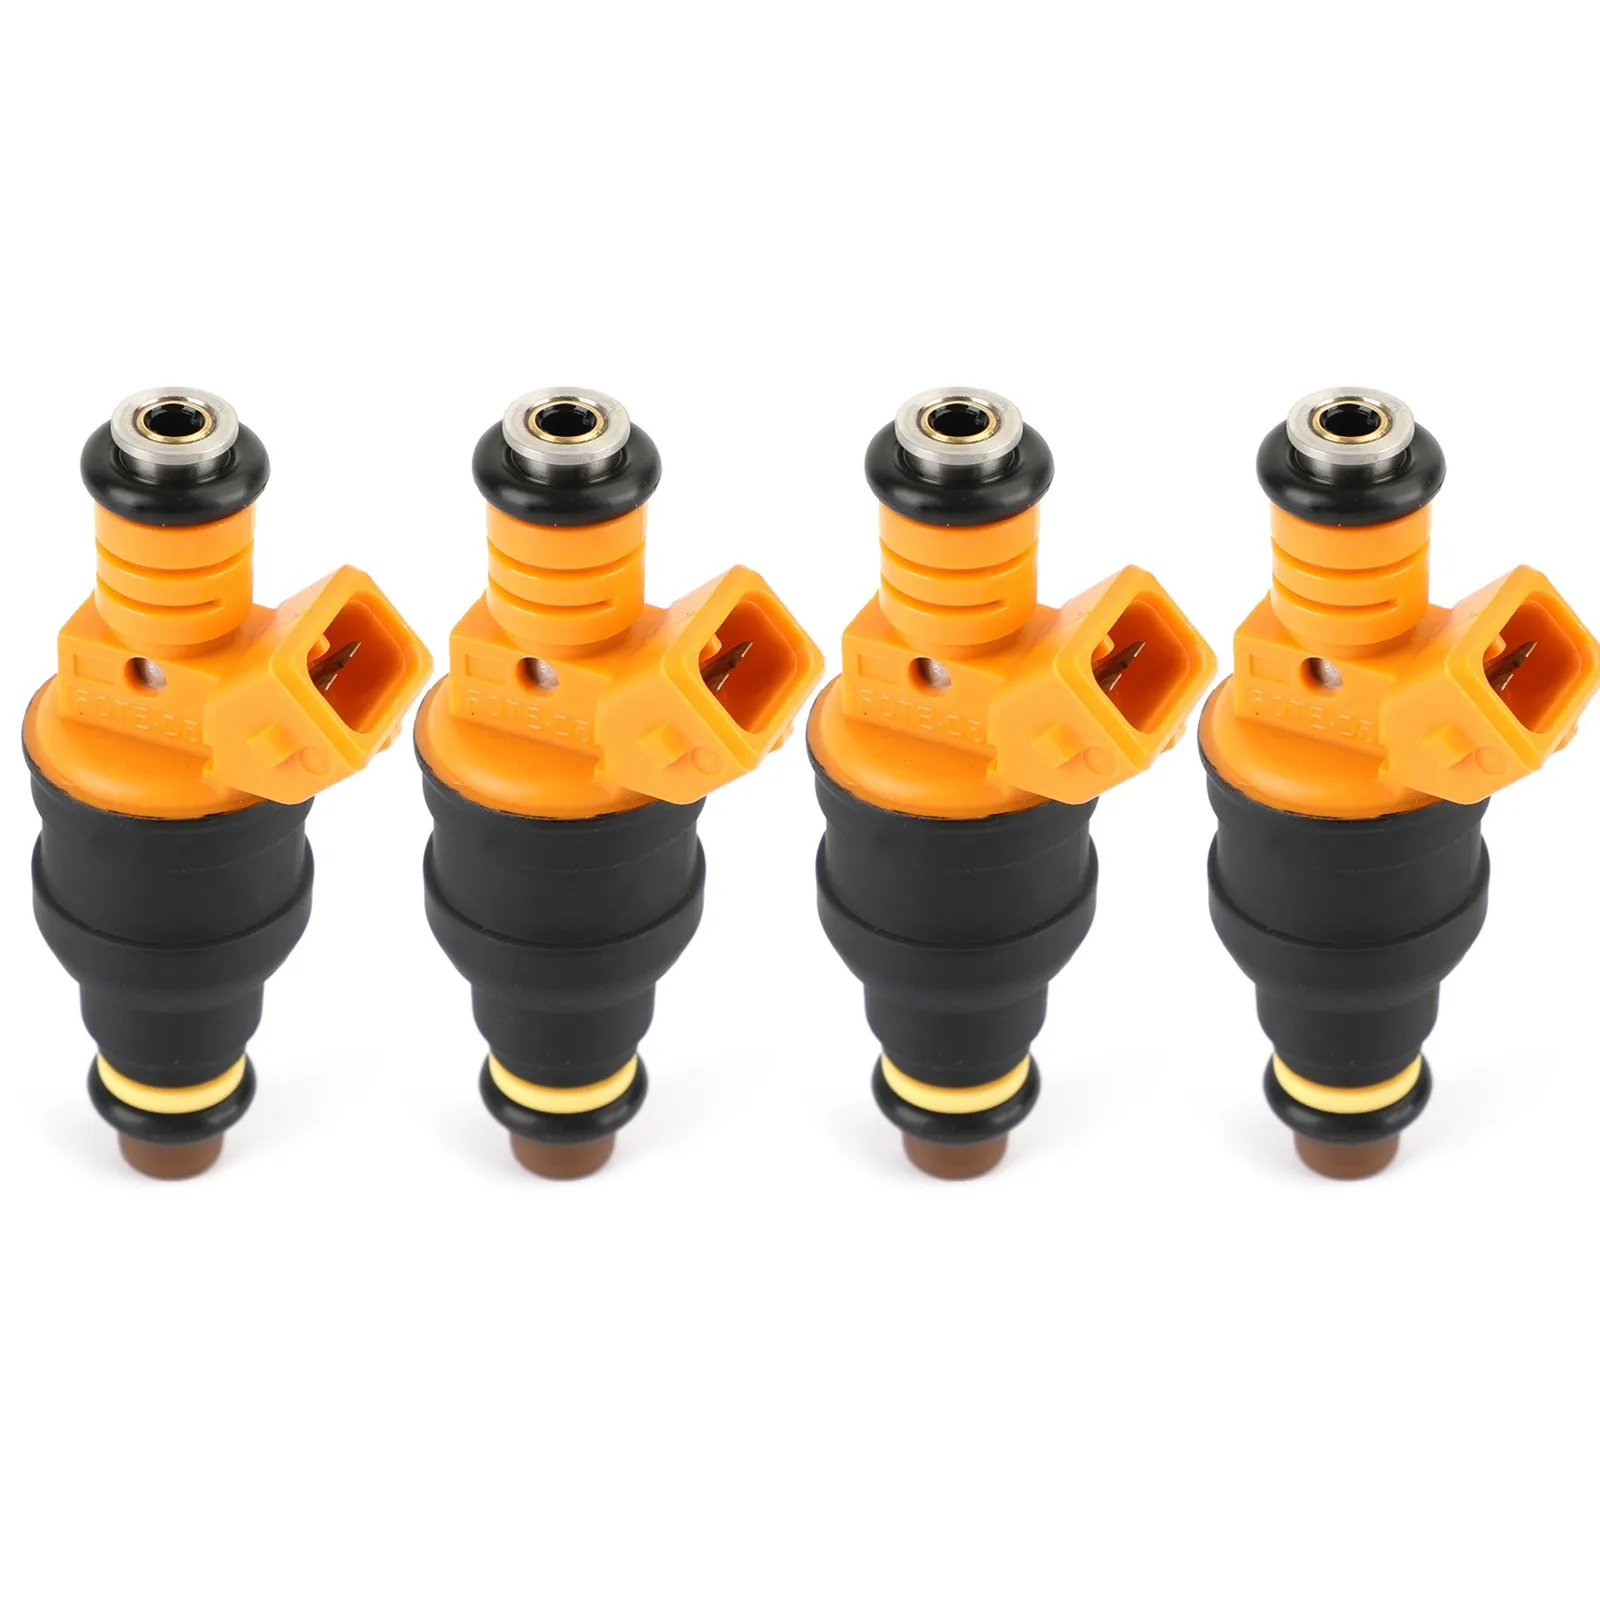 

Areyourshop 4Pc Fuel Injectors 028015094 for Ford F150 F250 F350 for Lincoln 4.6 5.0 5.4 5.8 V8